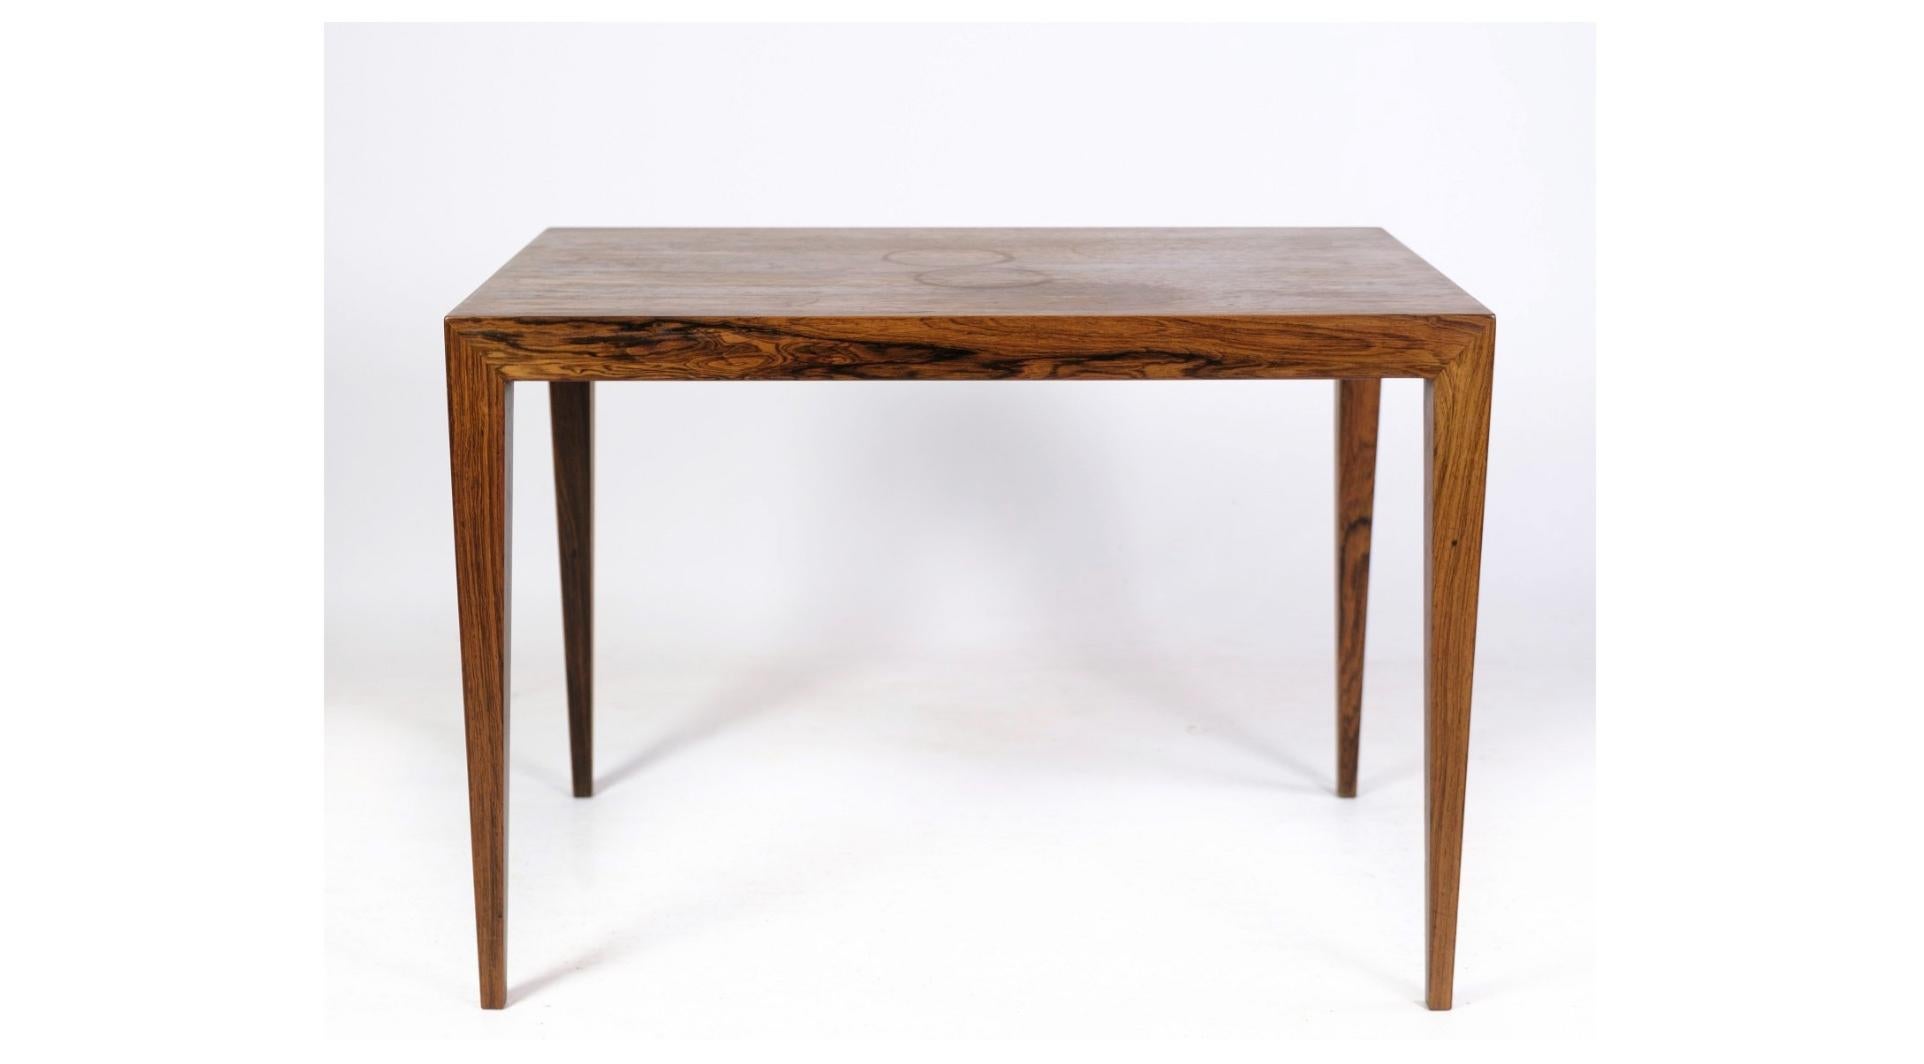 A rosewood side table designed by Severin Hansen and crafted by the esteemed Haslev Furniture Factory in the 1960s. This elegant piece exudes the timeless charm and exceptional craftsmanship characteristic of Danish mid-century design.

Crafted from